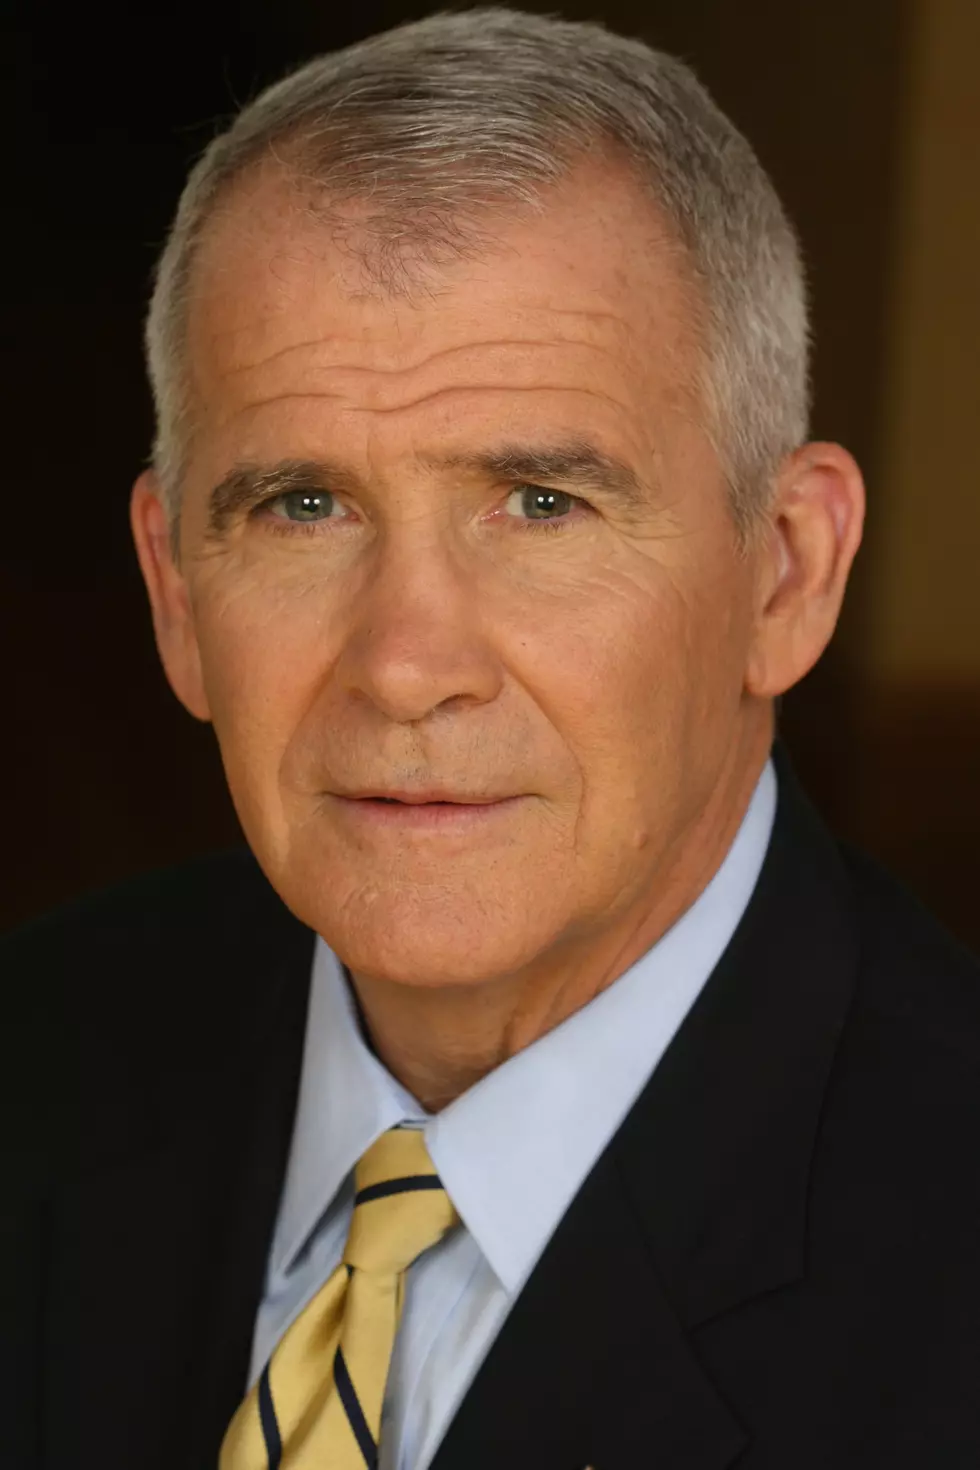 Oliver North To Be Speaker At Boys and Girls Club Event In Casper